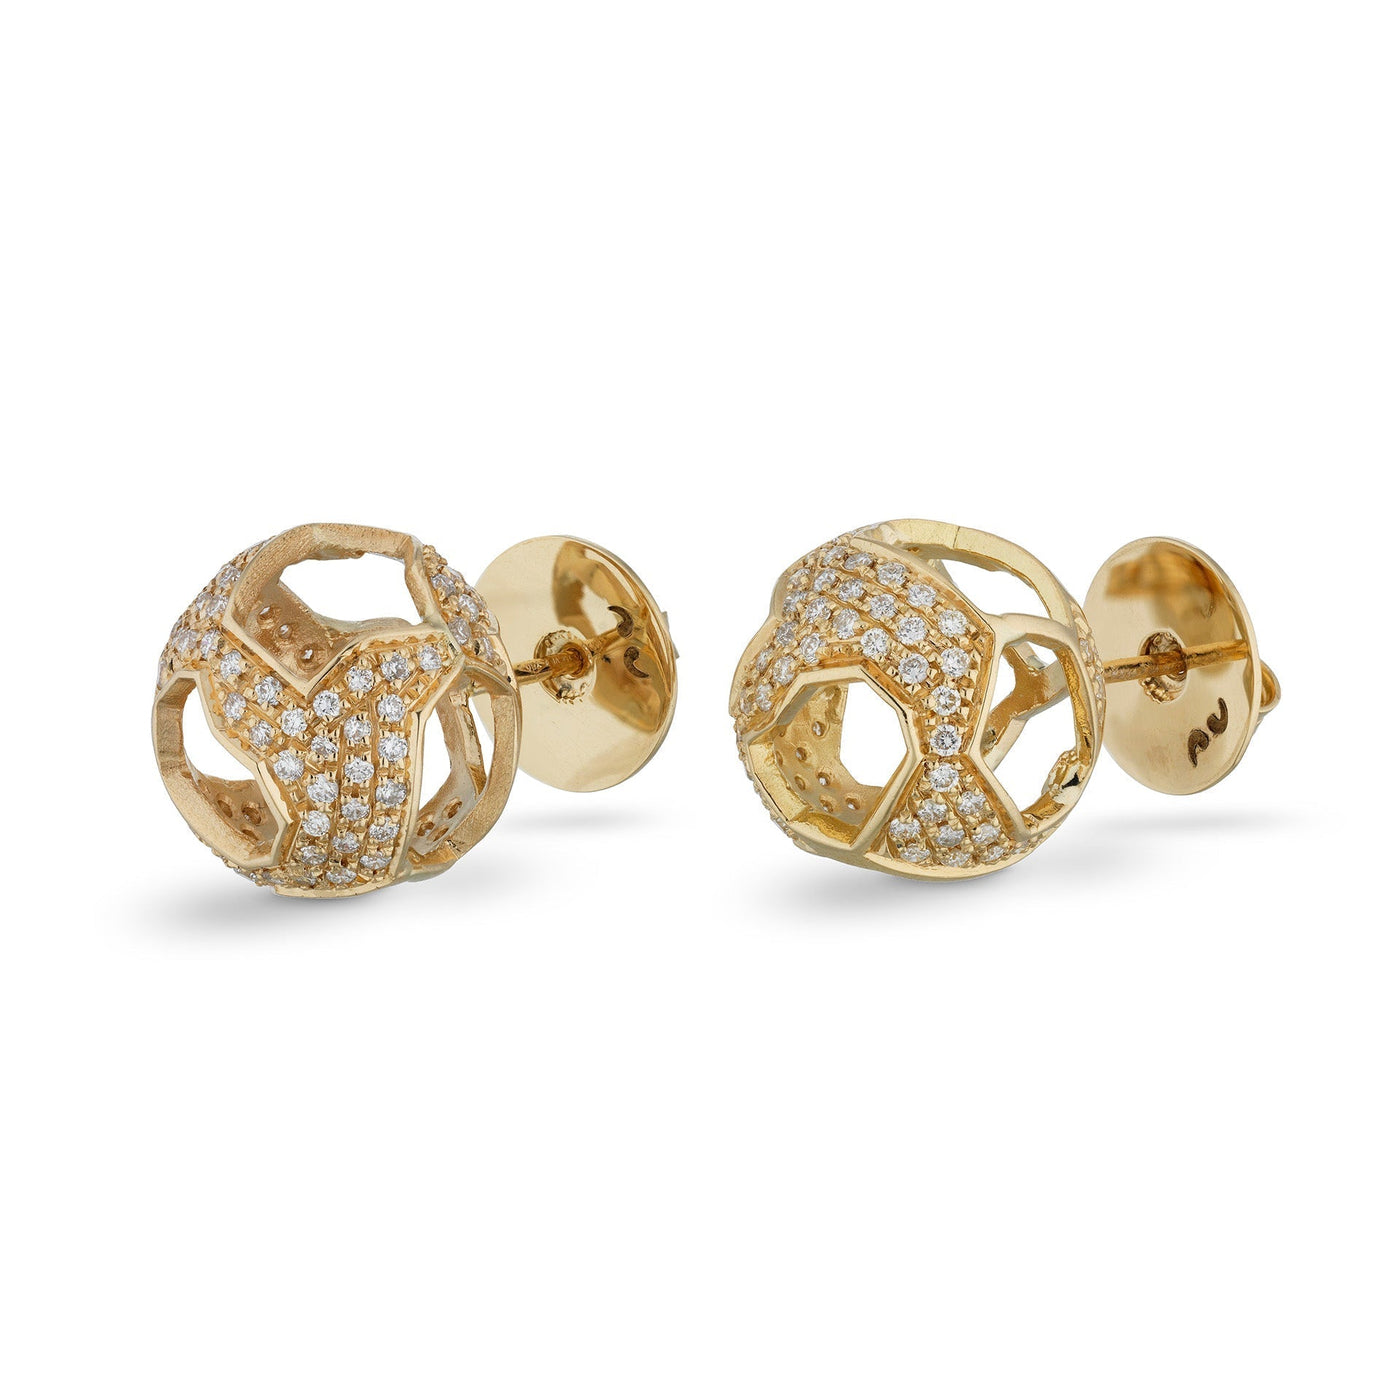 Explosion of Joy Grand Studs Earrings with White Diamonds